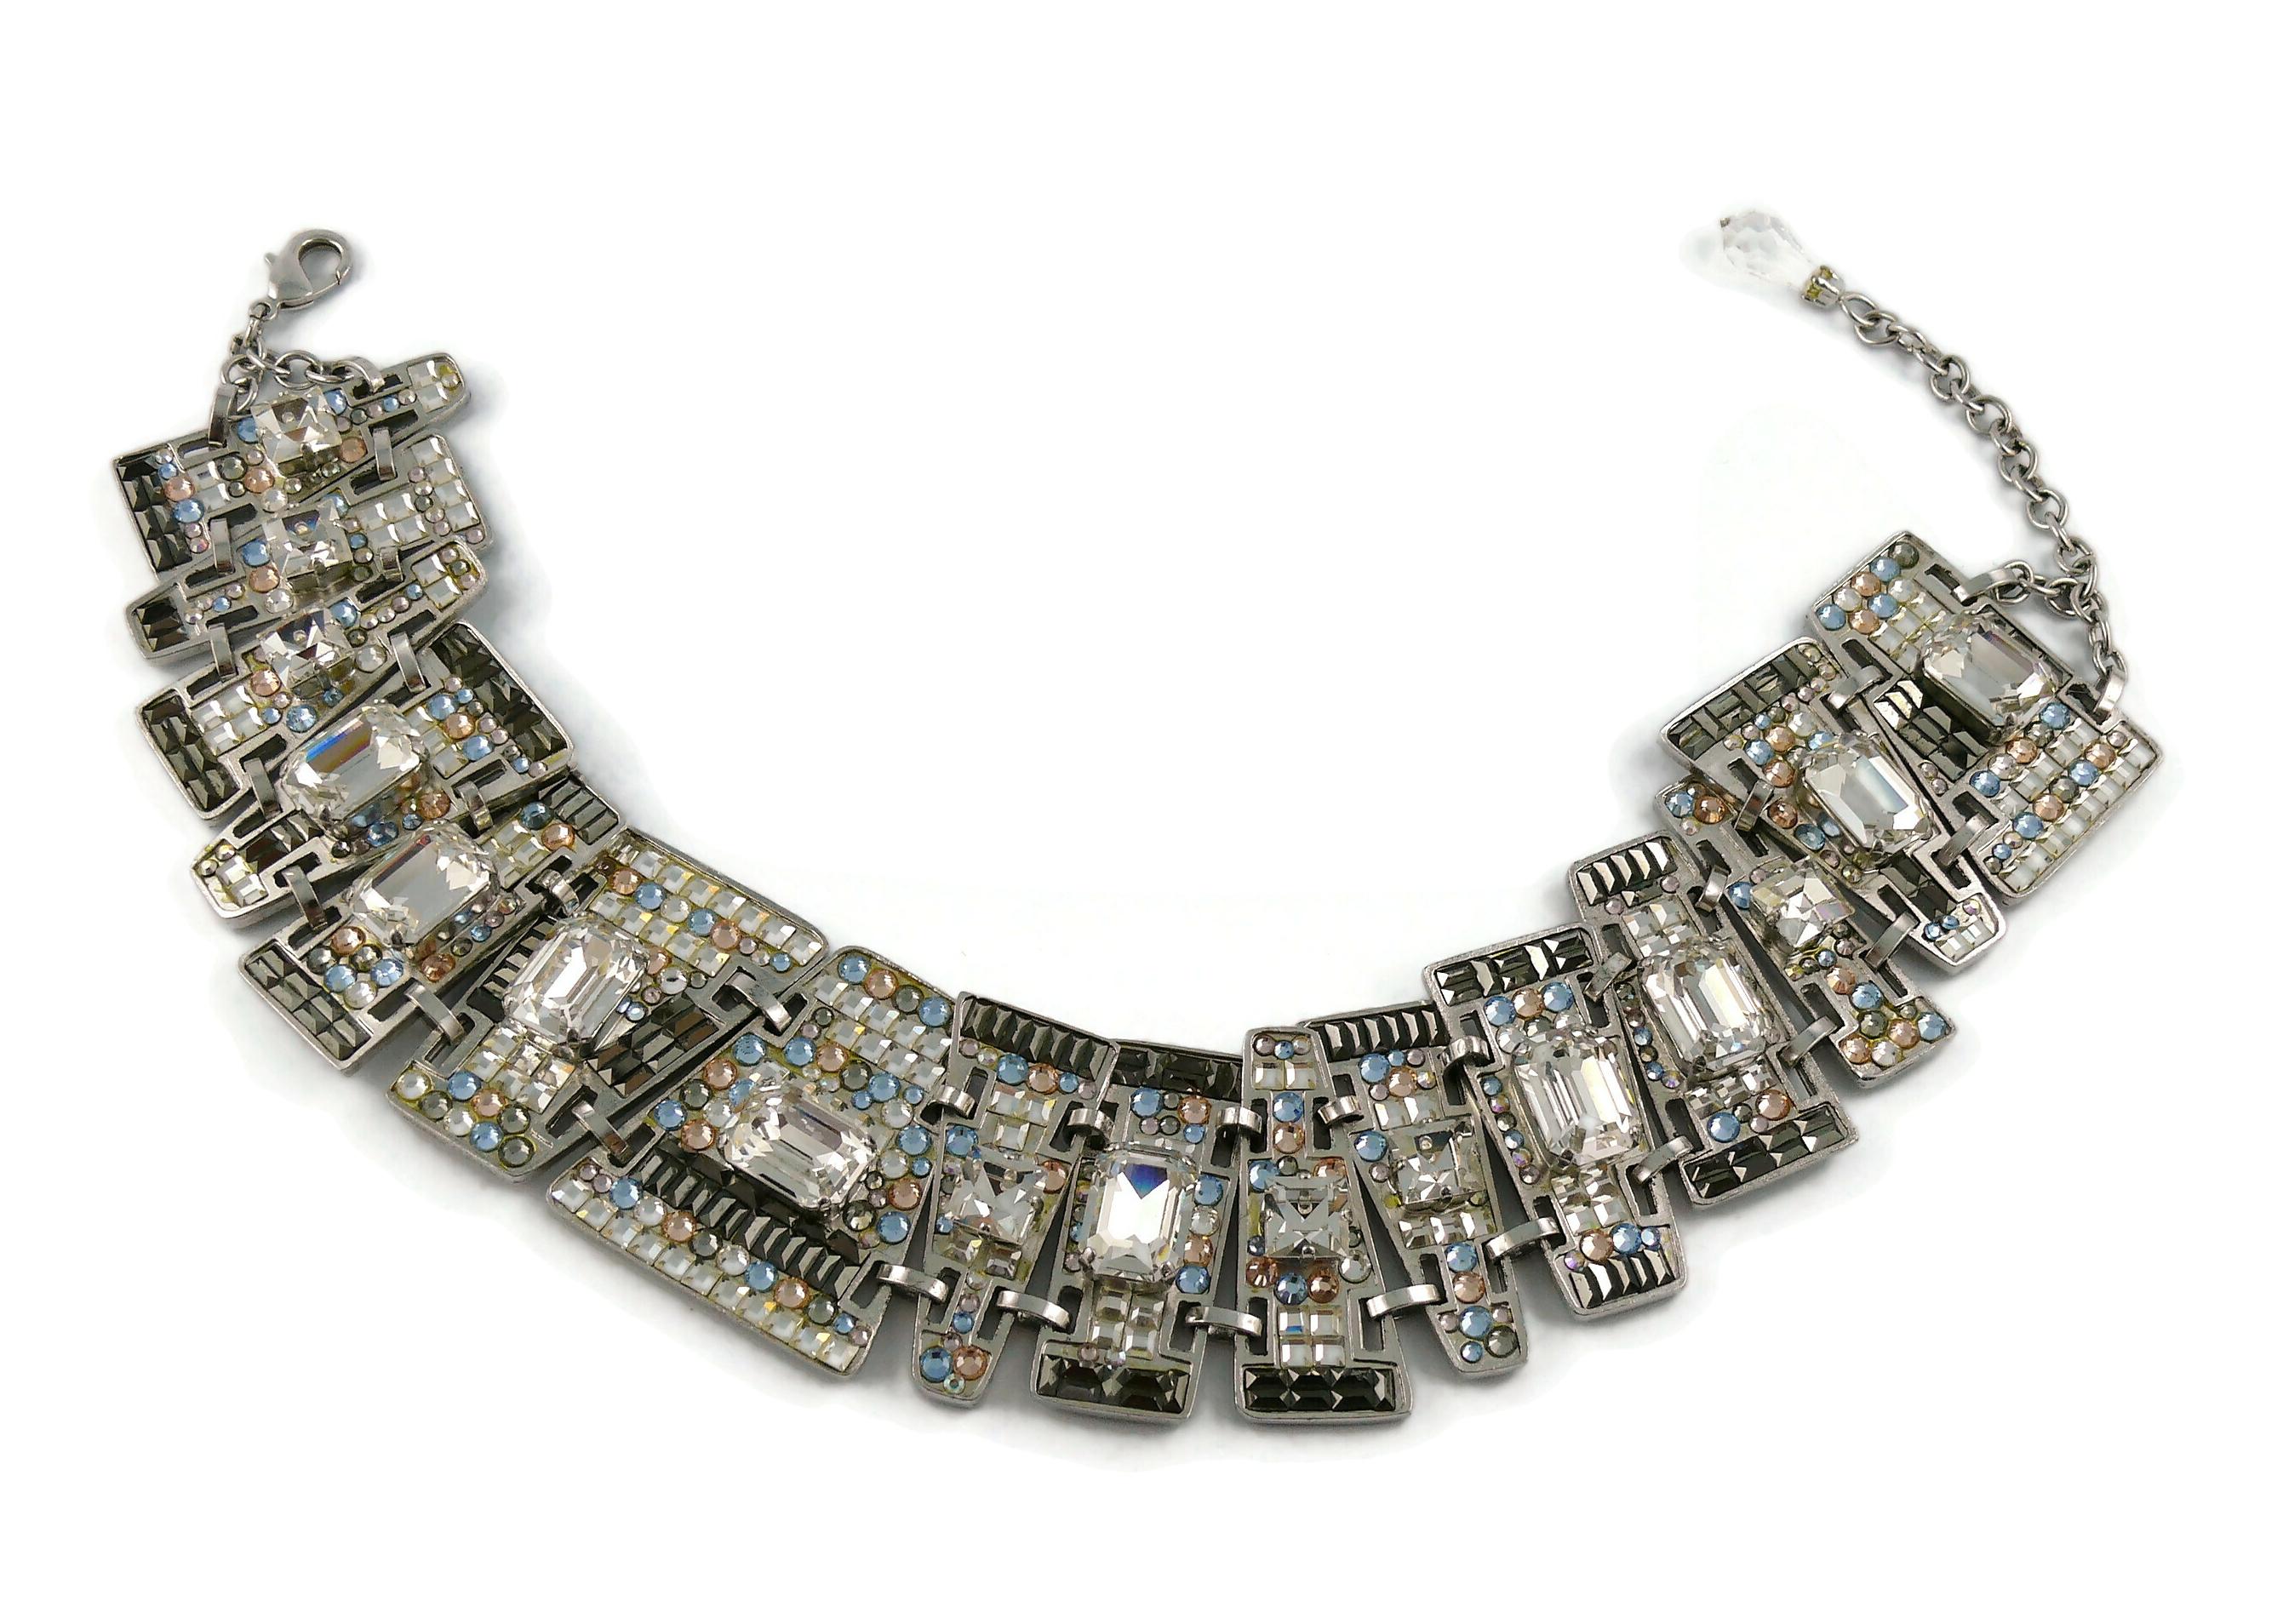 CHRISTIAN LACROIX vintage silver toned articulated choker necklace embellished with multicolored crystals (clear, grey, pink, blue).

Silver tone metal hardware.

Adjustable lobster clasp closure.

Marked CHRISTIAN LACROIX CL Made in